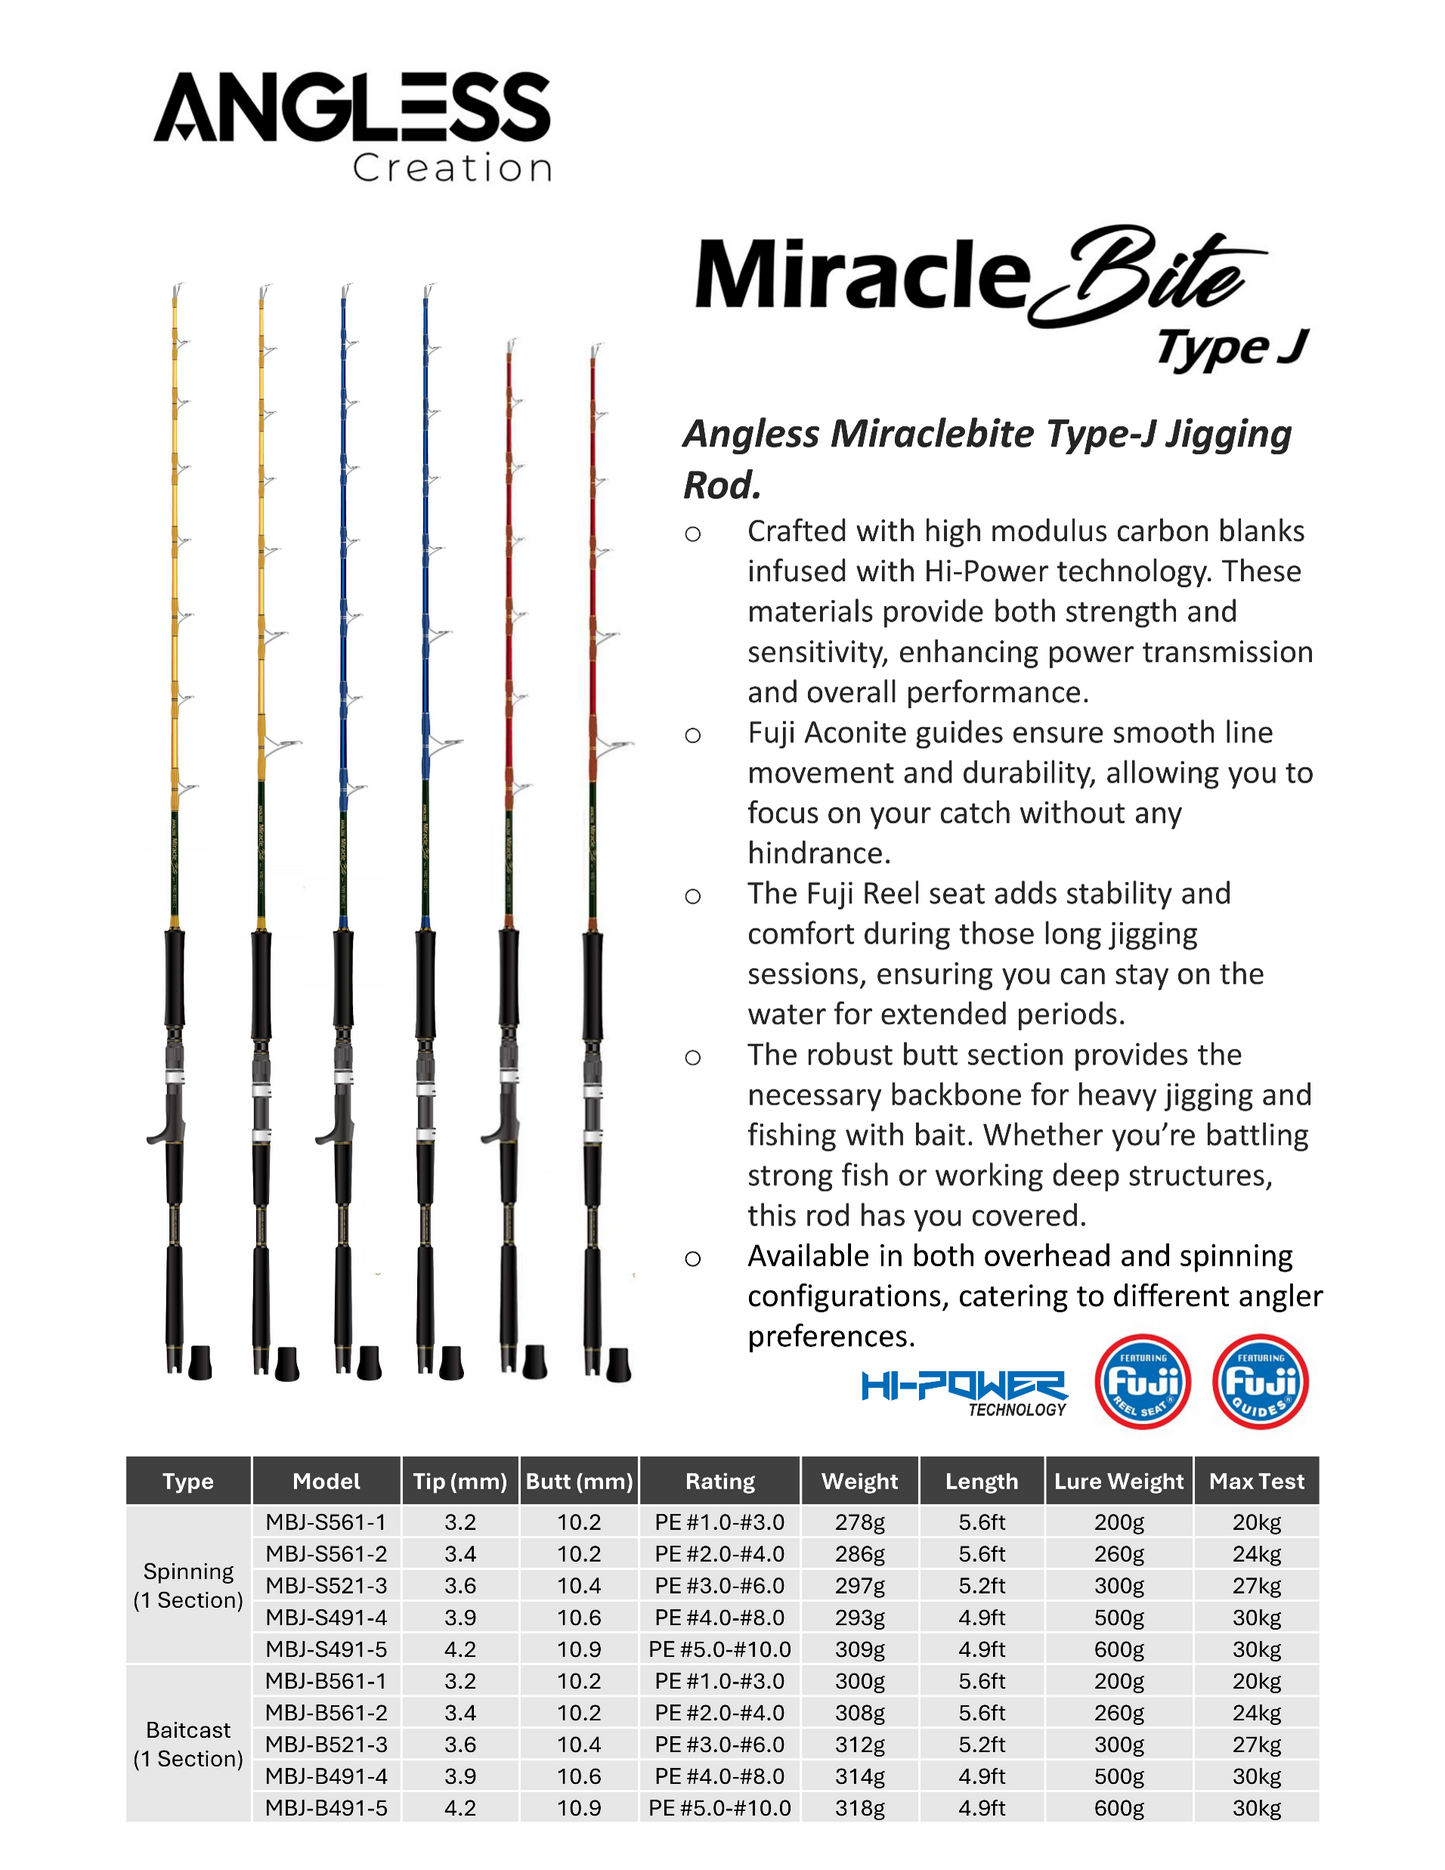 Angless MiracleBite Type-J jigging rod (1section)